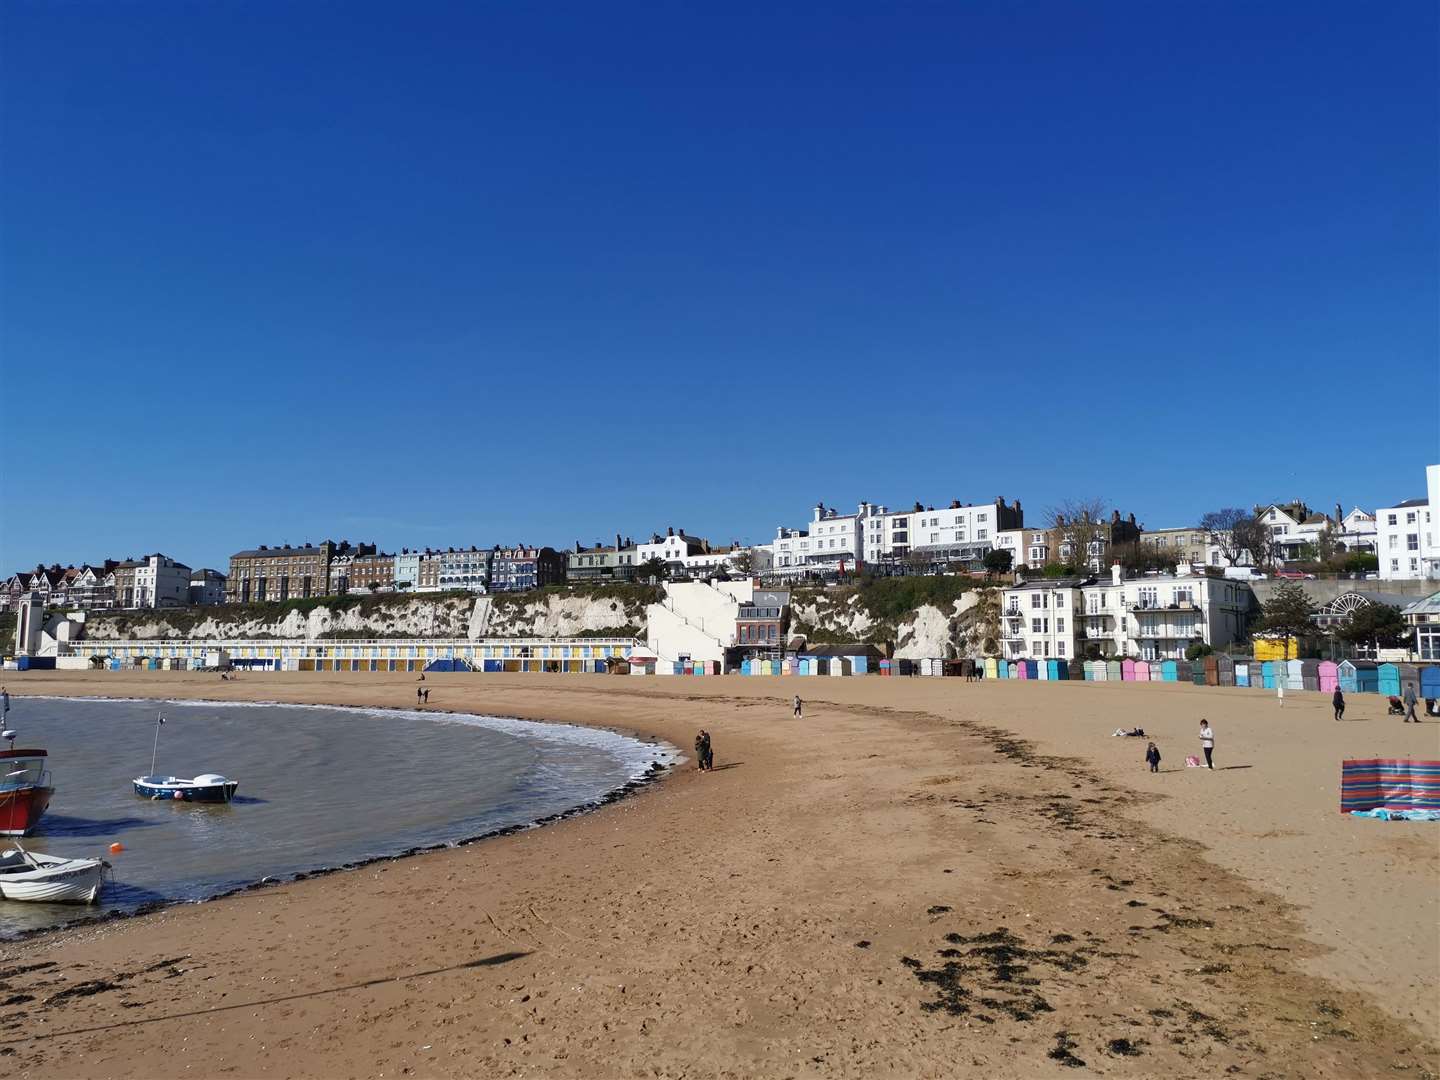 People have been told not to enter the sea at Viking Bay, Broadstairs, by Thanet District Council after an "unscreened wastewater release" by Southern Water. Stock image